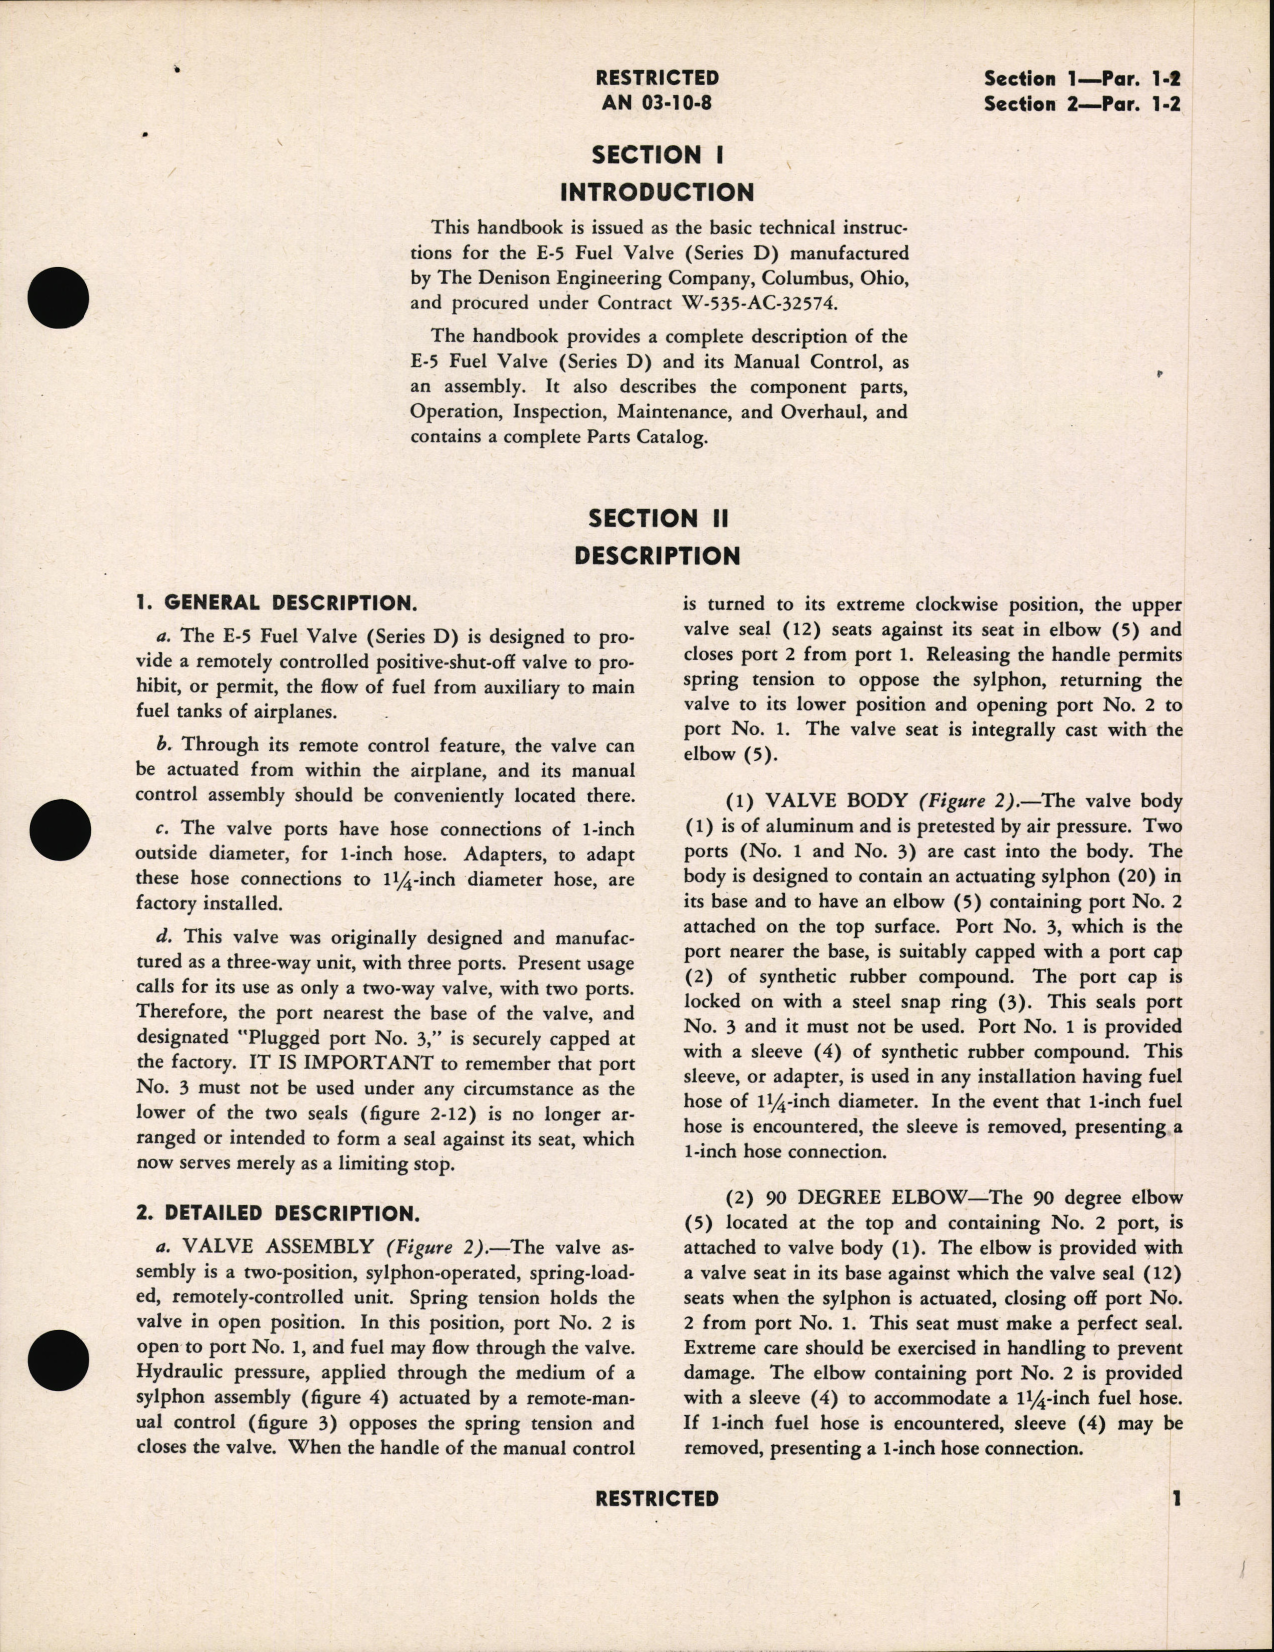 Sample page 5 from AirCorps Library document: Handbook of Instructions with Parts Catalog for Type E-5 (Series D) Fuel Valve